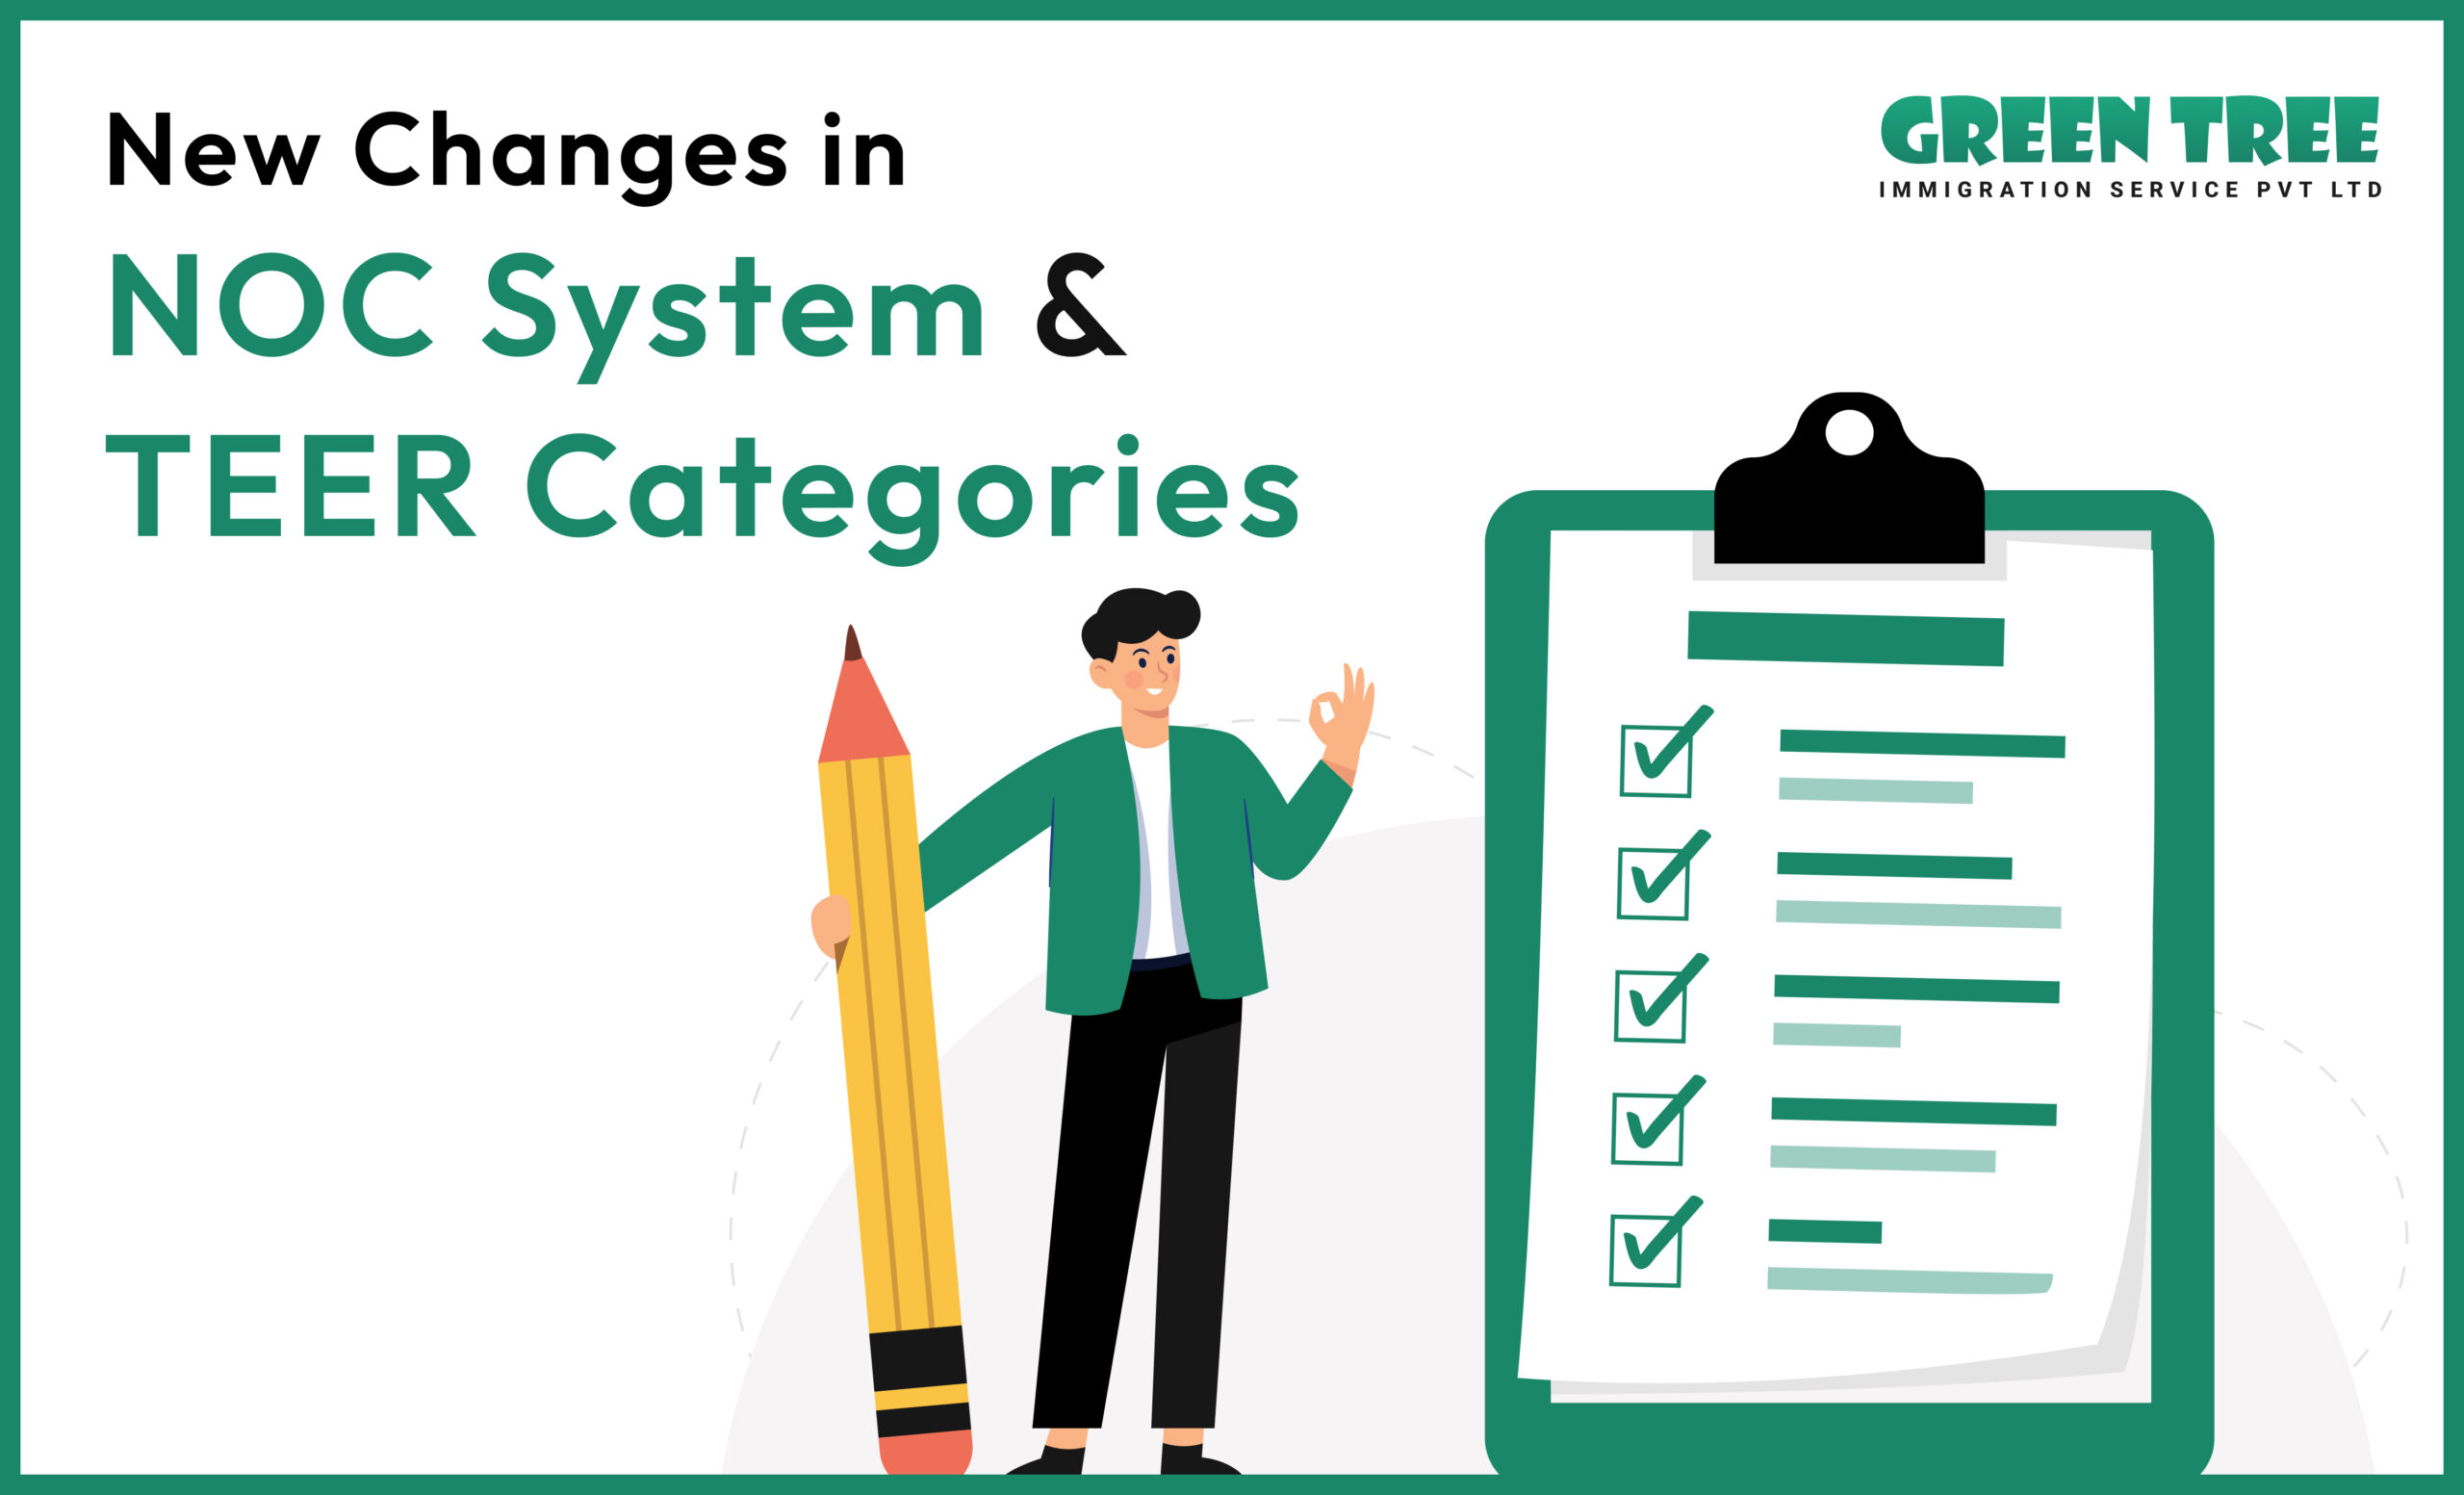 New Changes in NOC System & TEER Categories